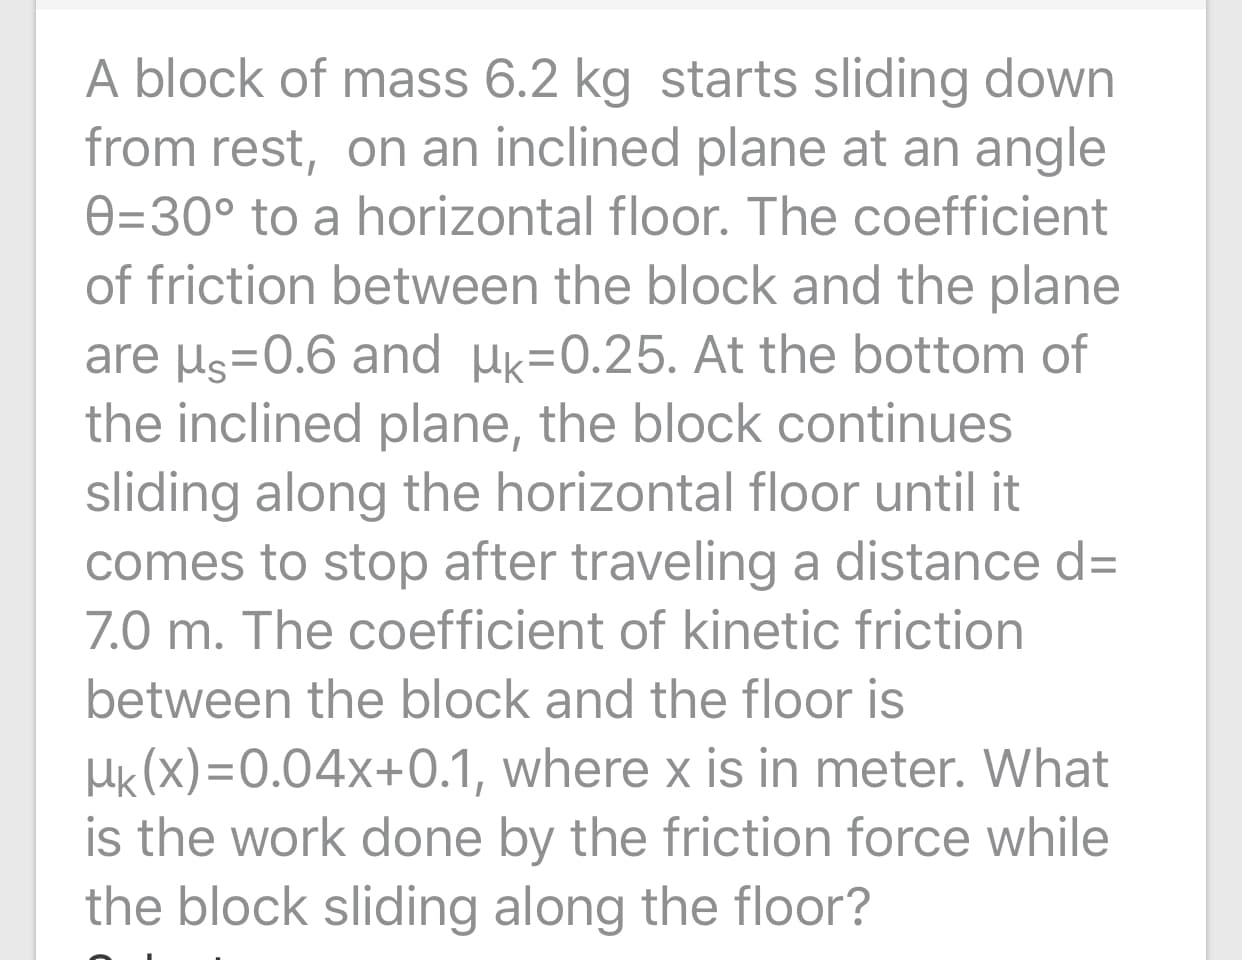 Hk(X)=0.04x+0.1, where x is in meter. What
is the work done by the friction force while
the block sliding along the floor?
